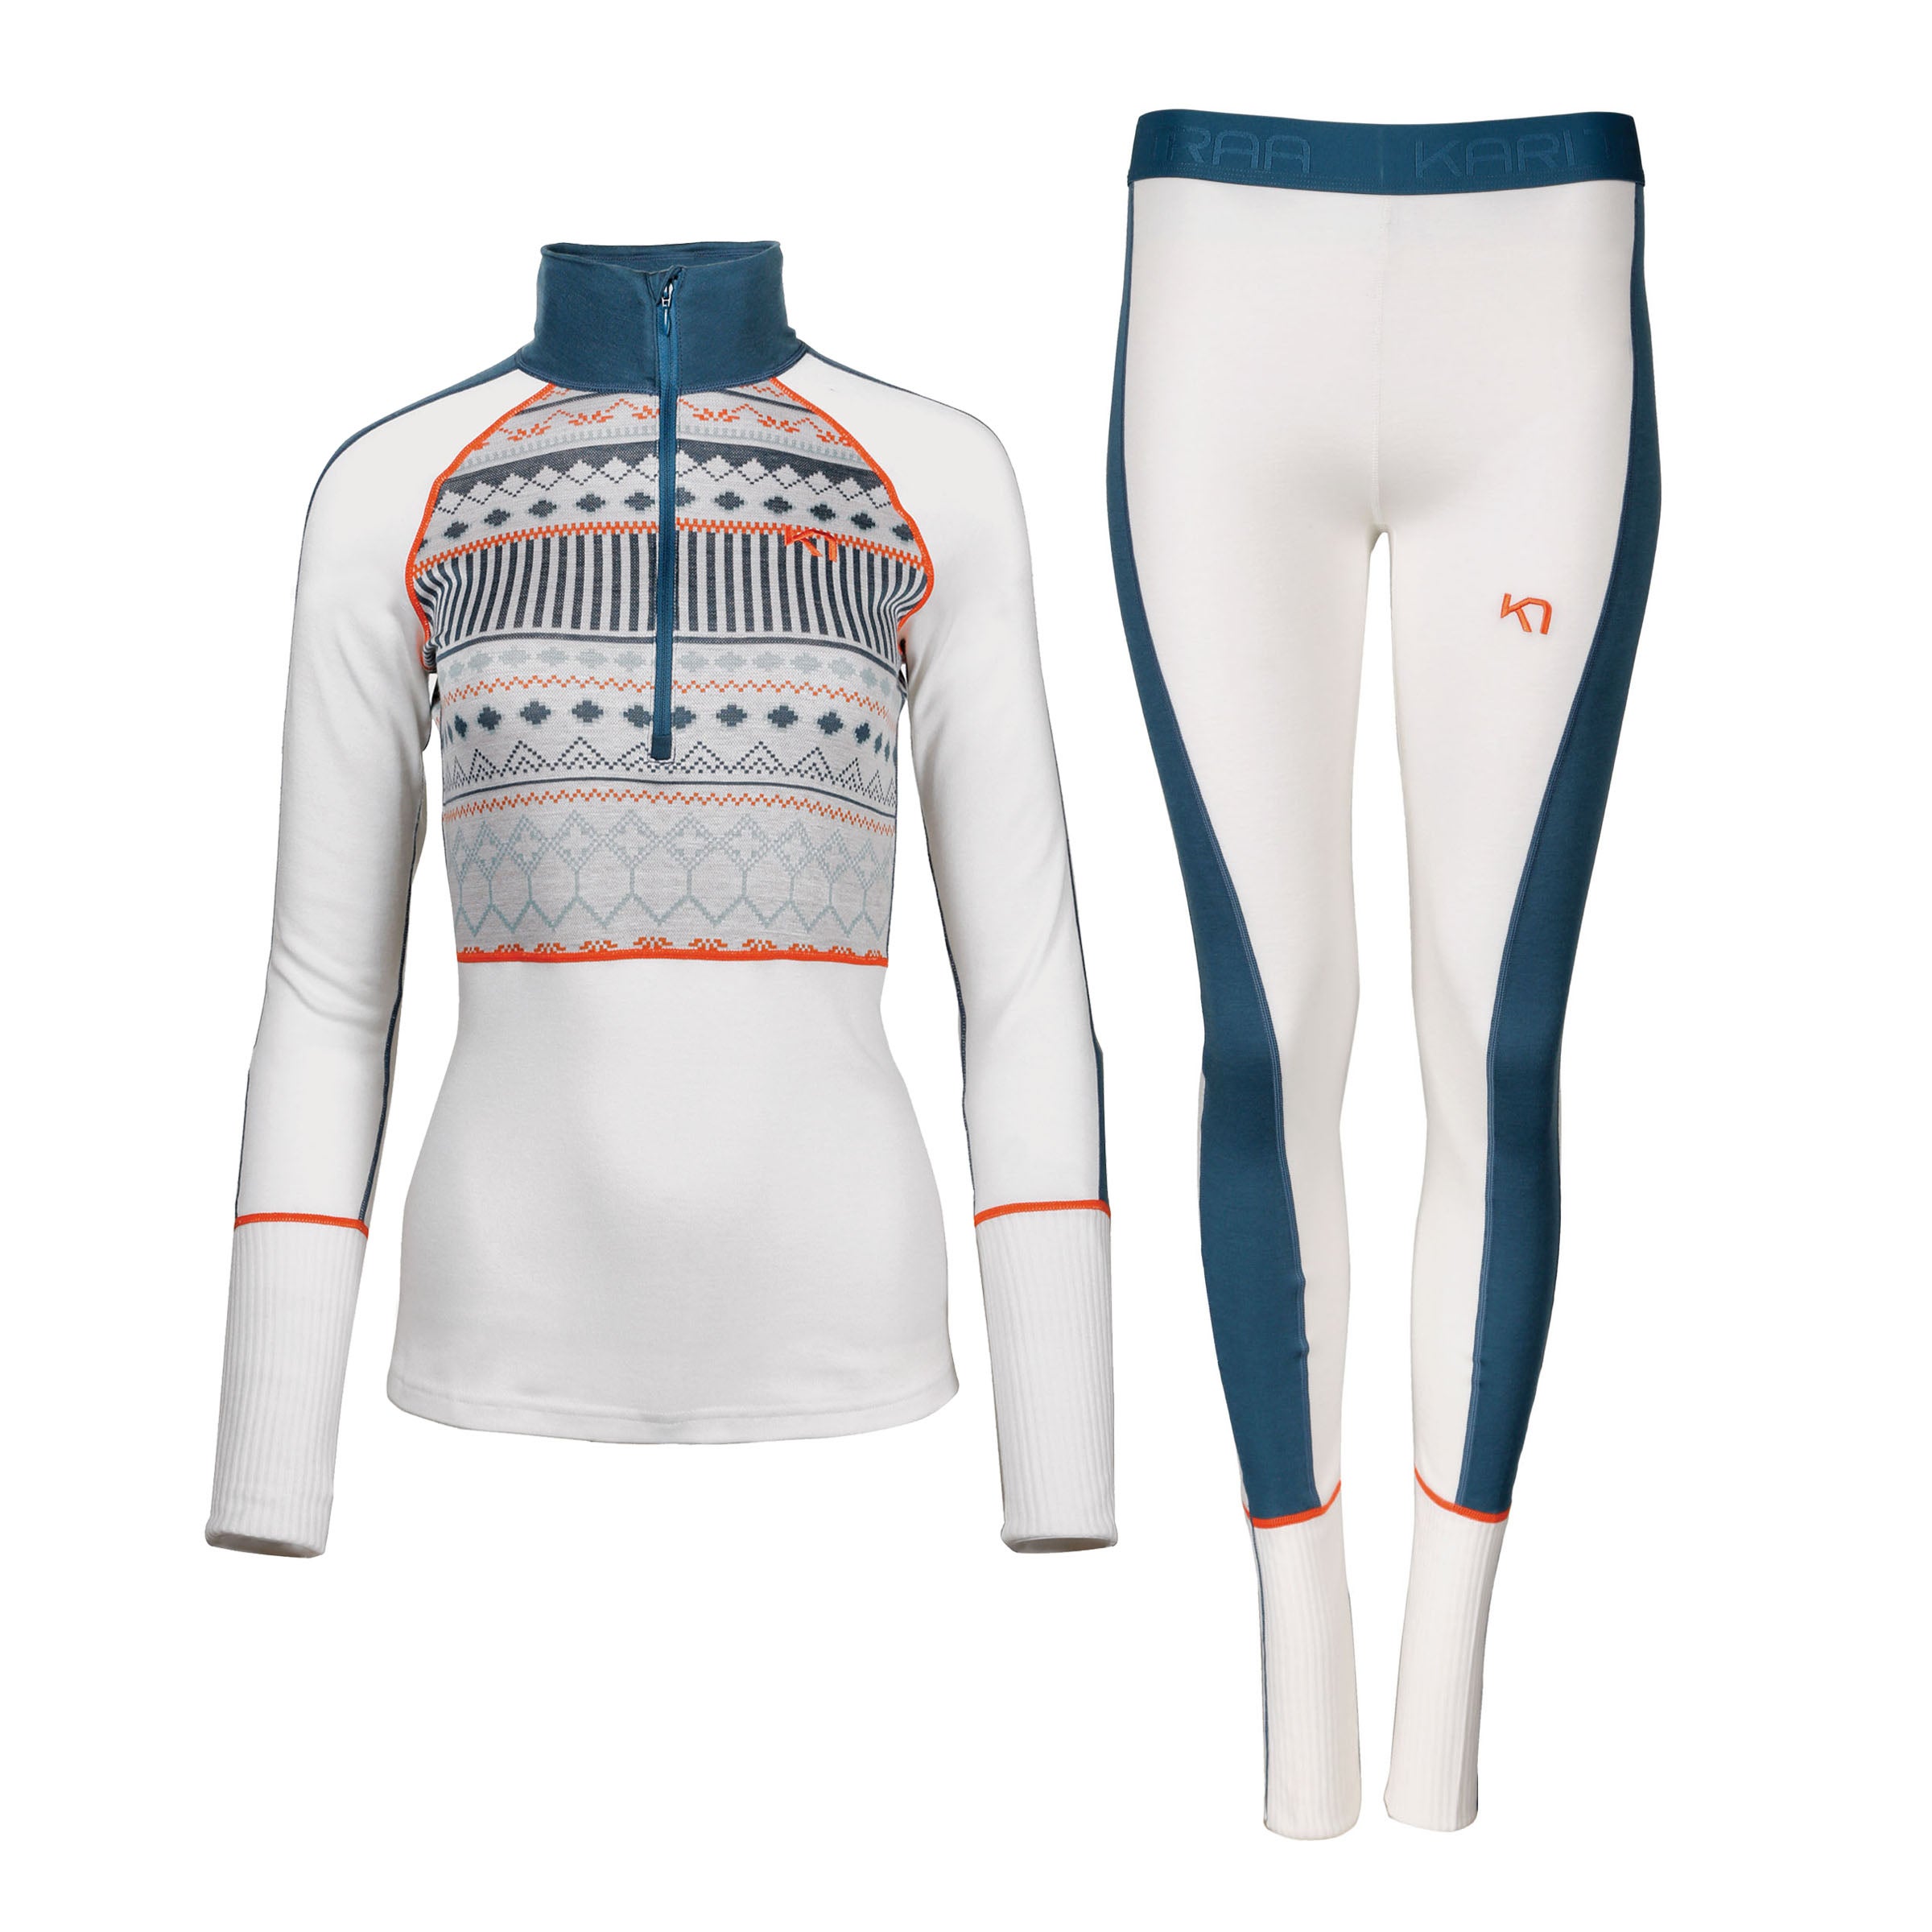 Ski Base Layers, Thermals For Skiing